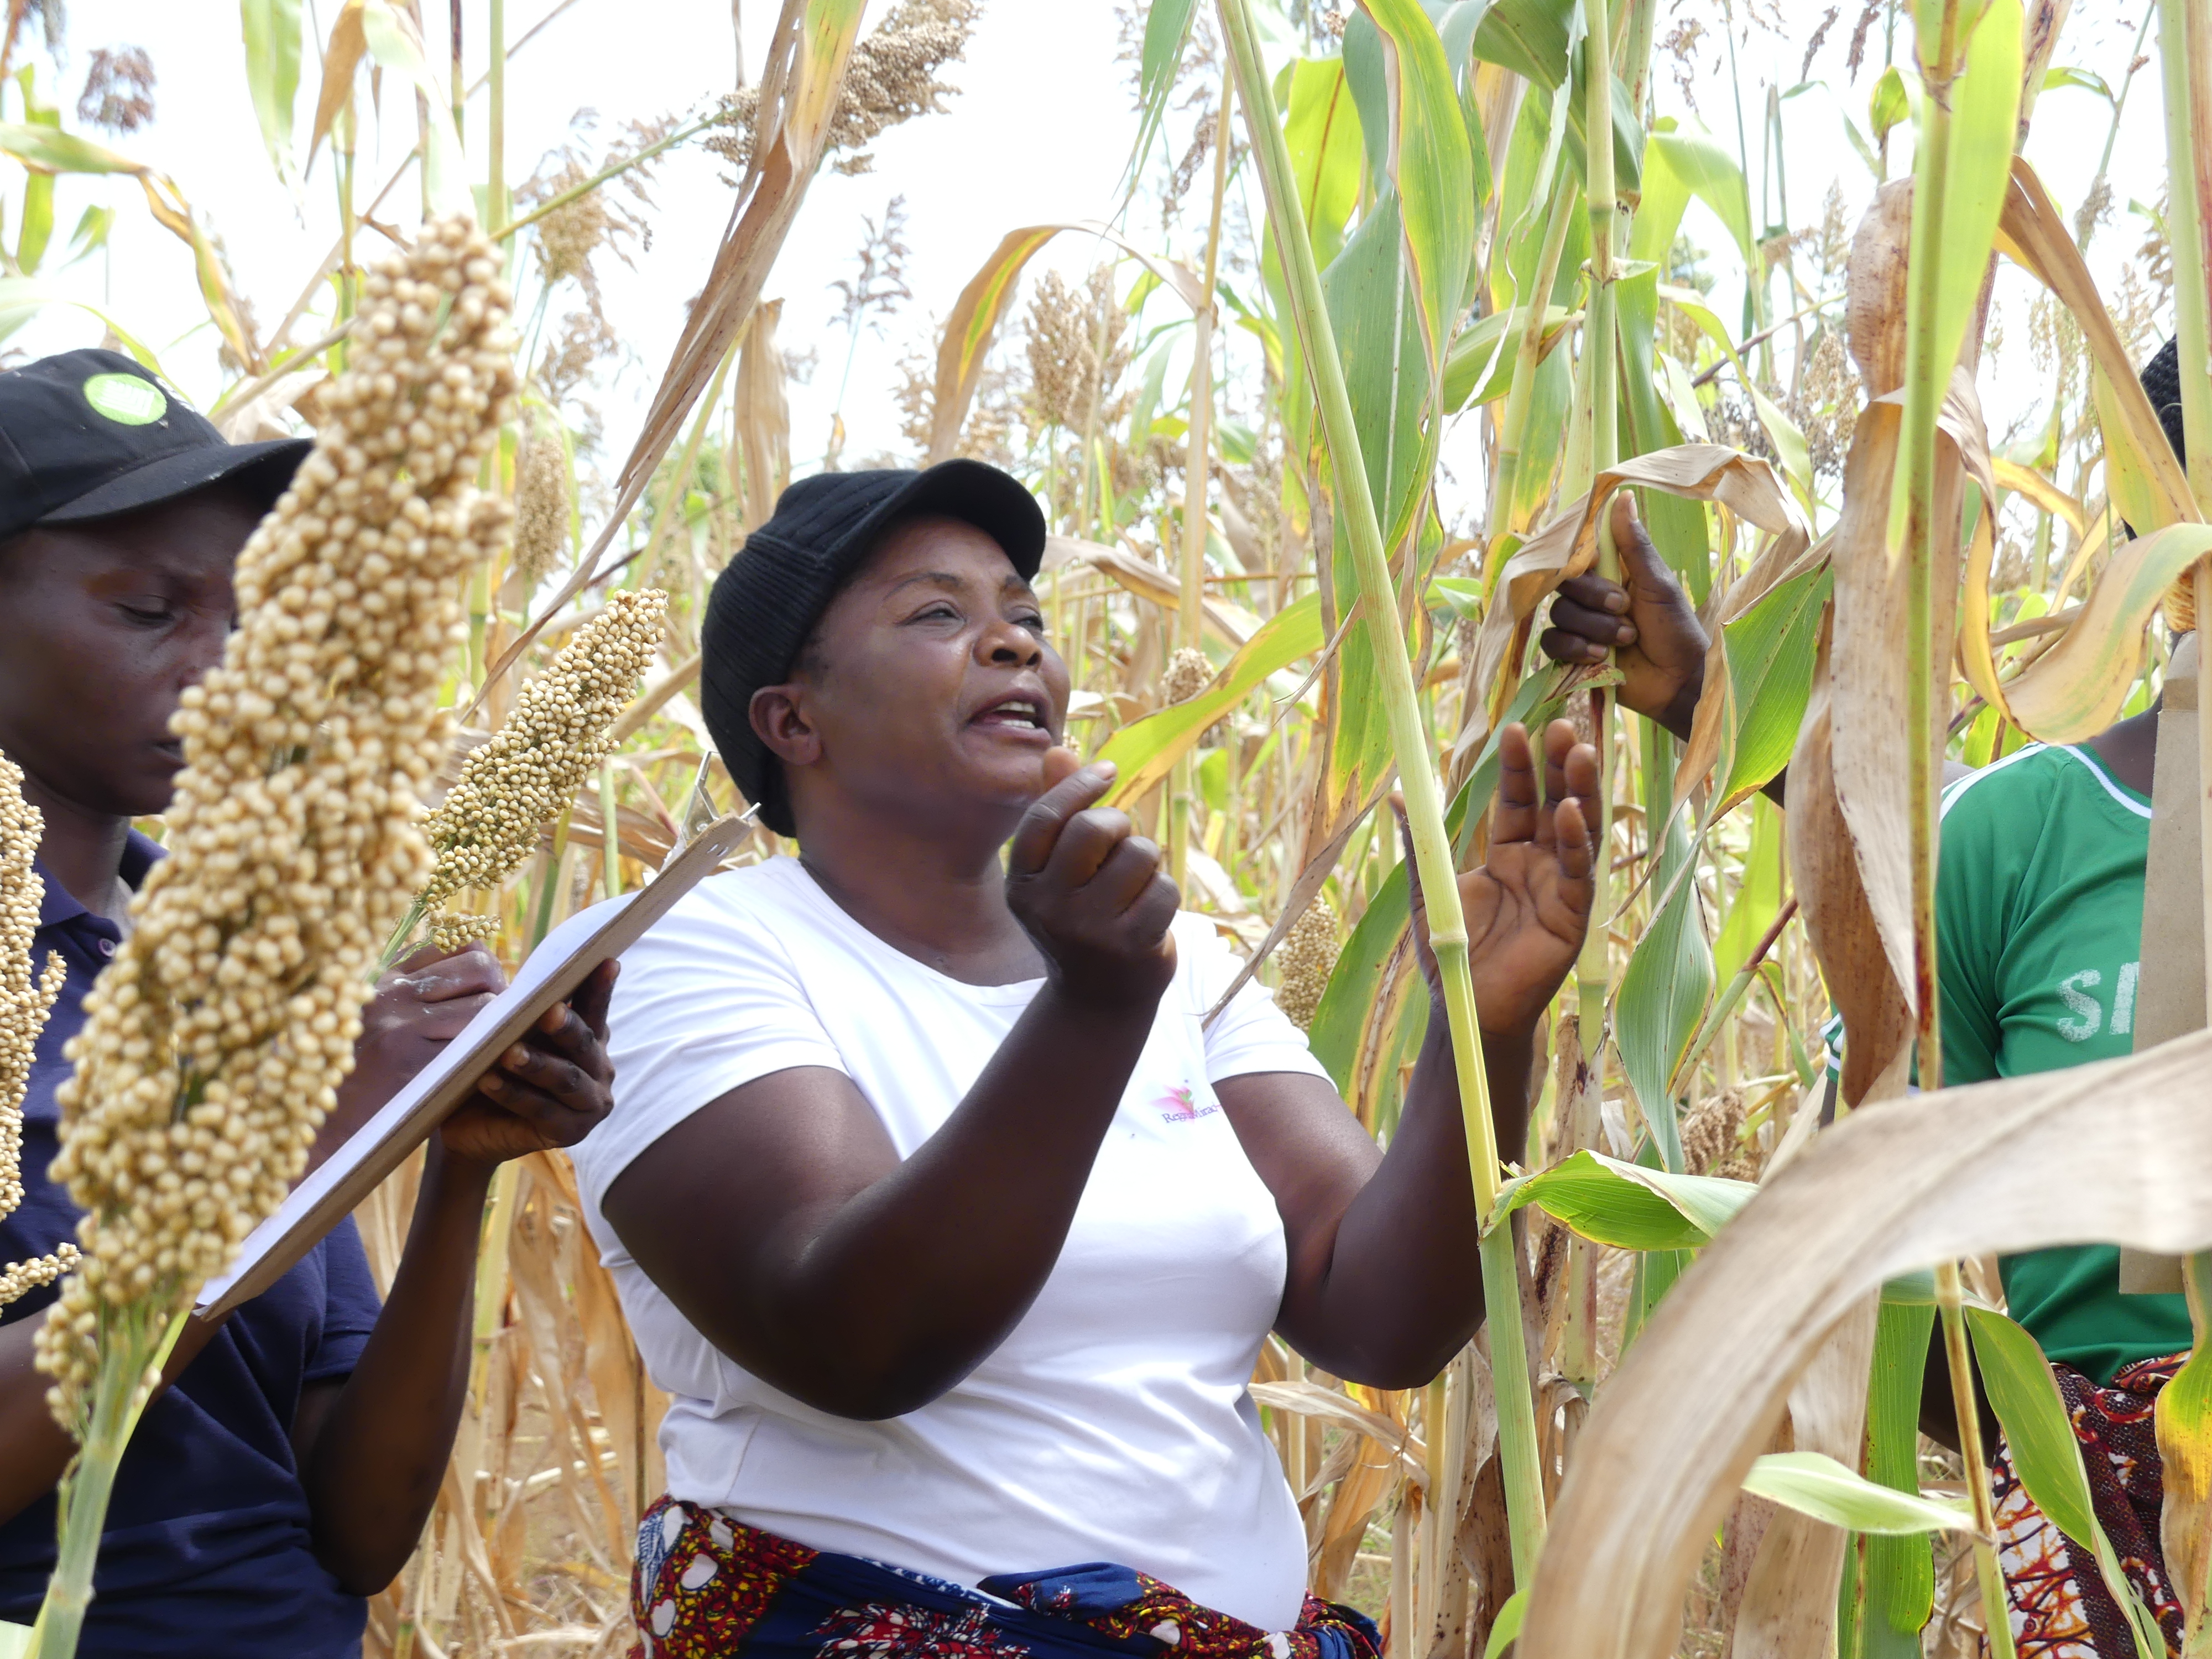 Zambian female farmer expert in a sorghum field talking to a group of people